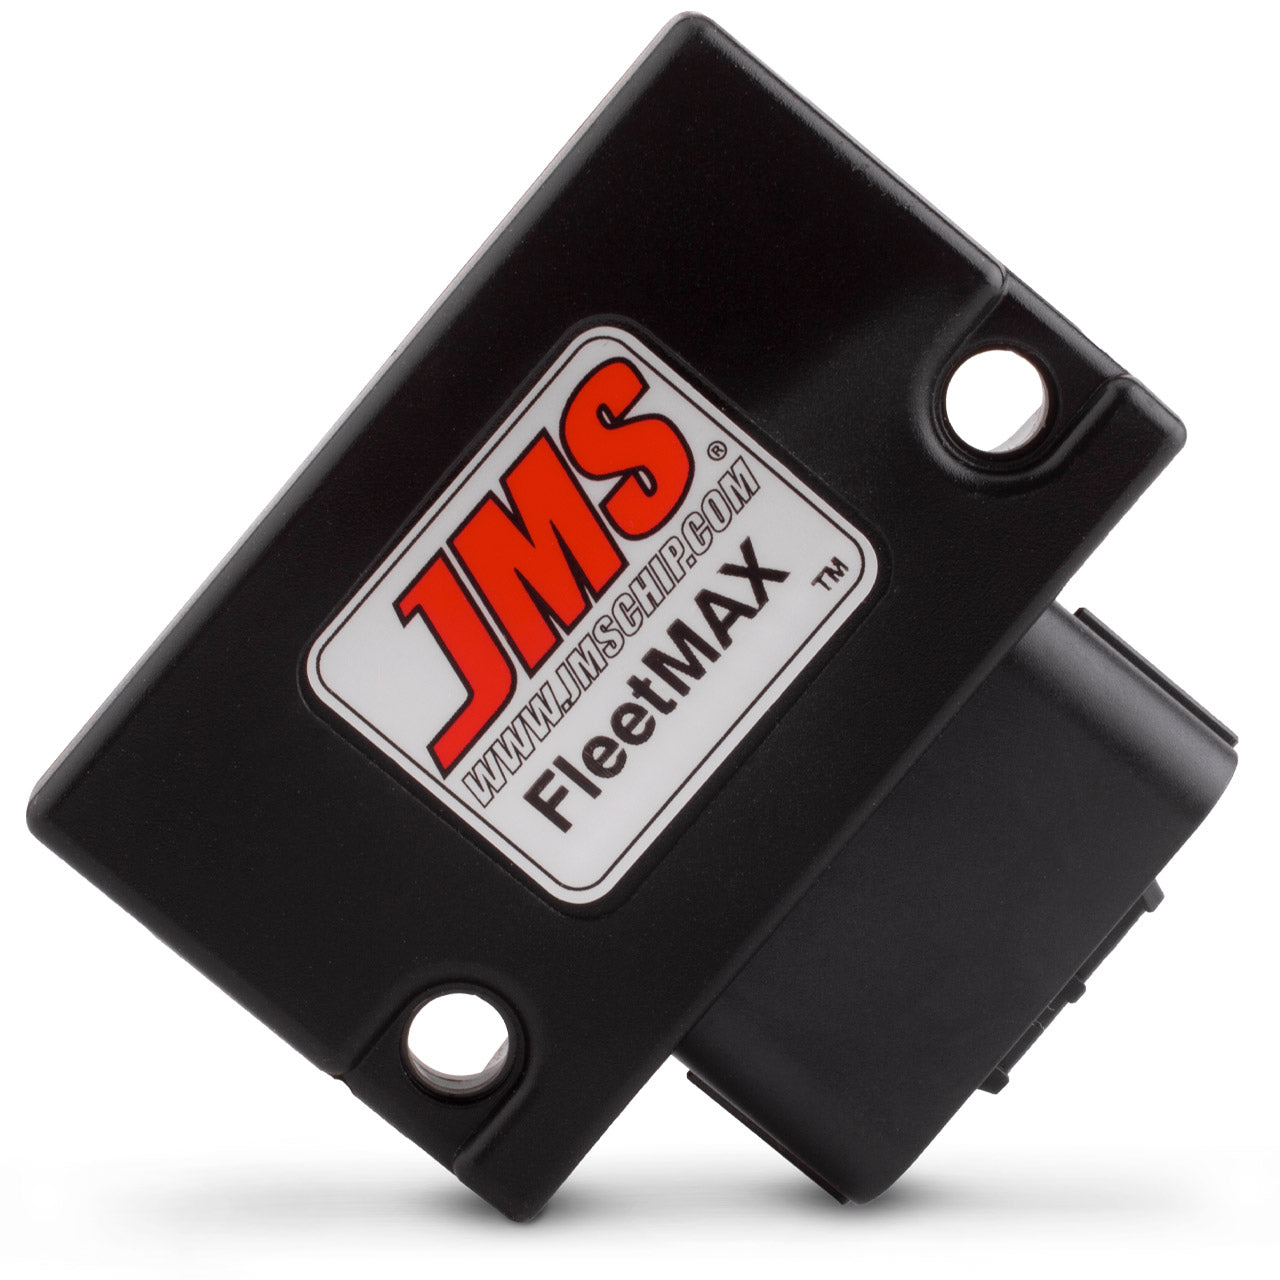 JMS FleetMAX Speed Control Device. Plug and Play for 2003 - 2021 Toyota Vehicles with electronic throttle control FX71116TYV1